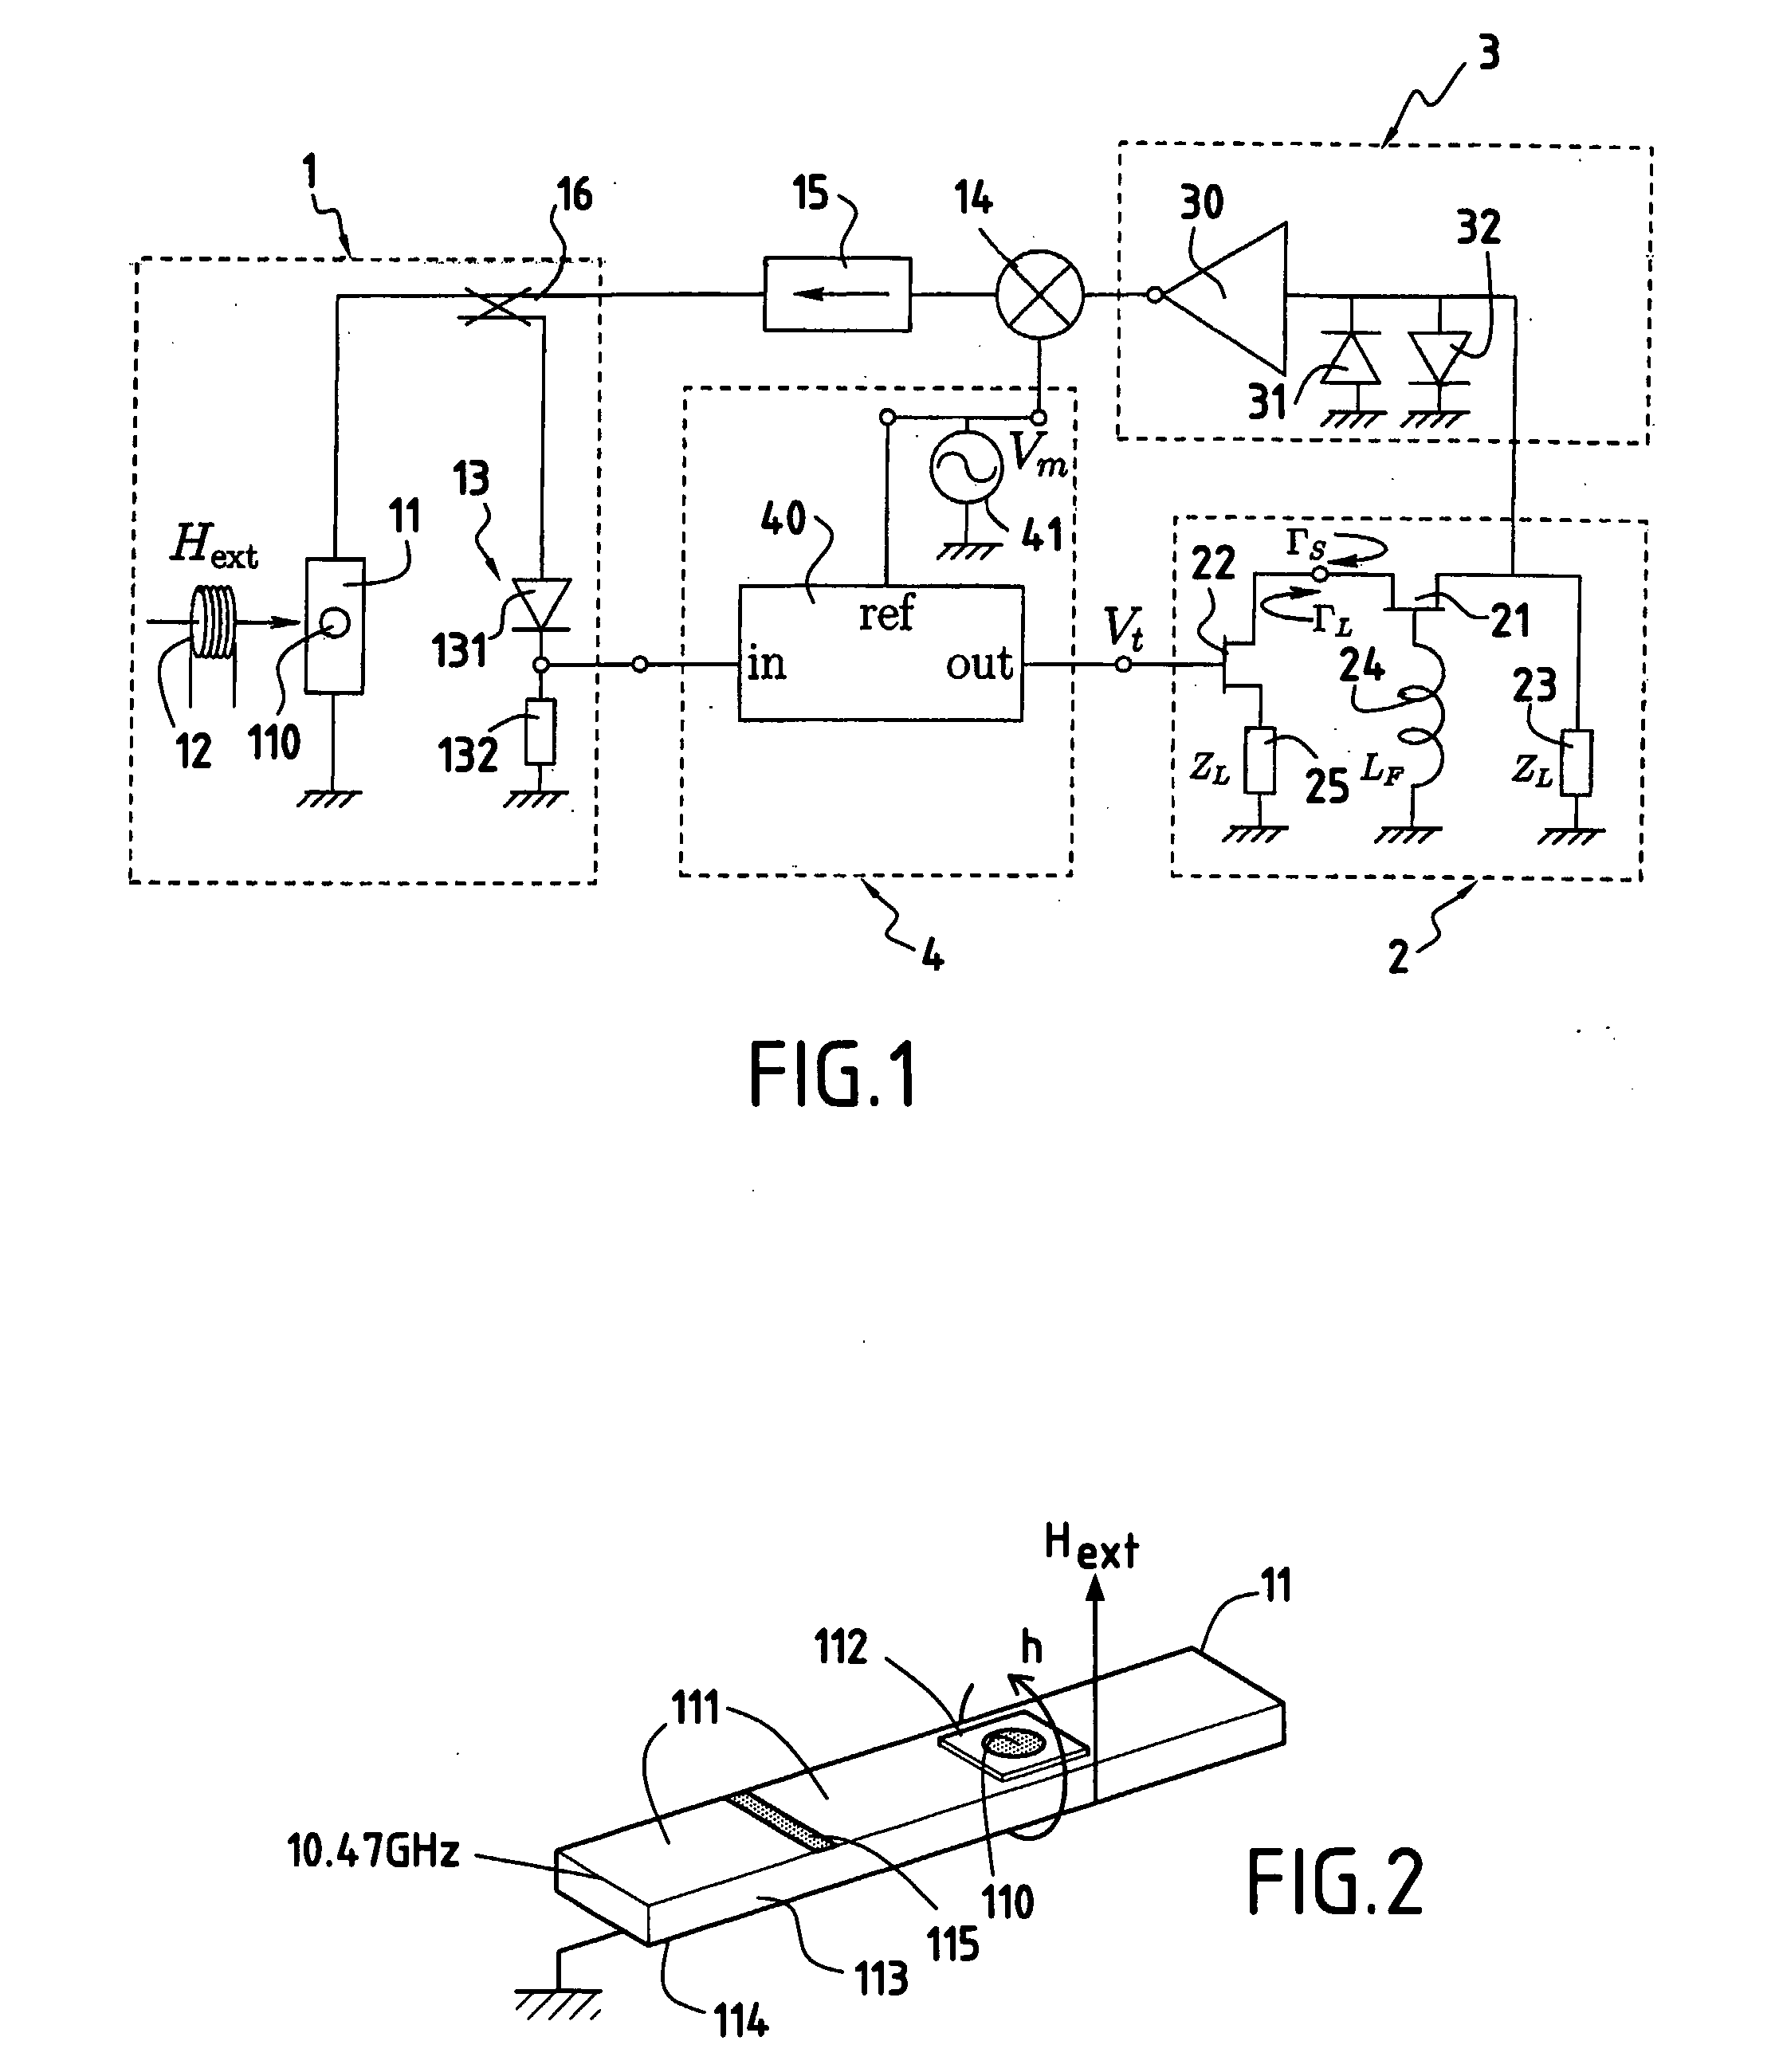 Microwave Oscillator Tuned With a Ferromagnetic Thin Film